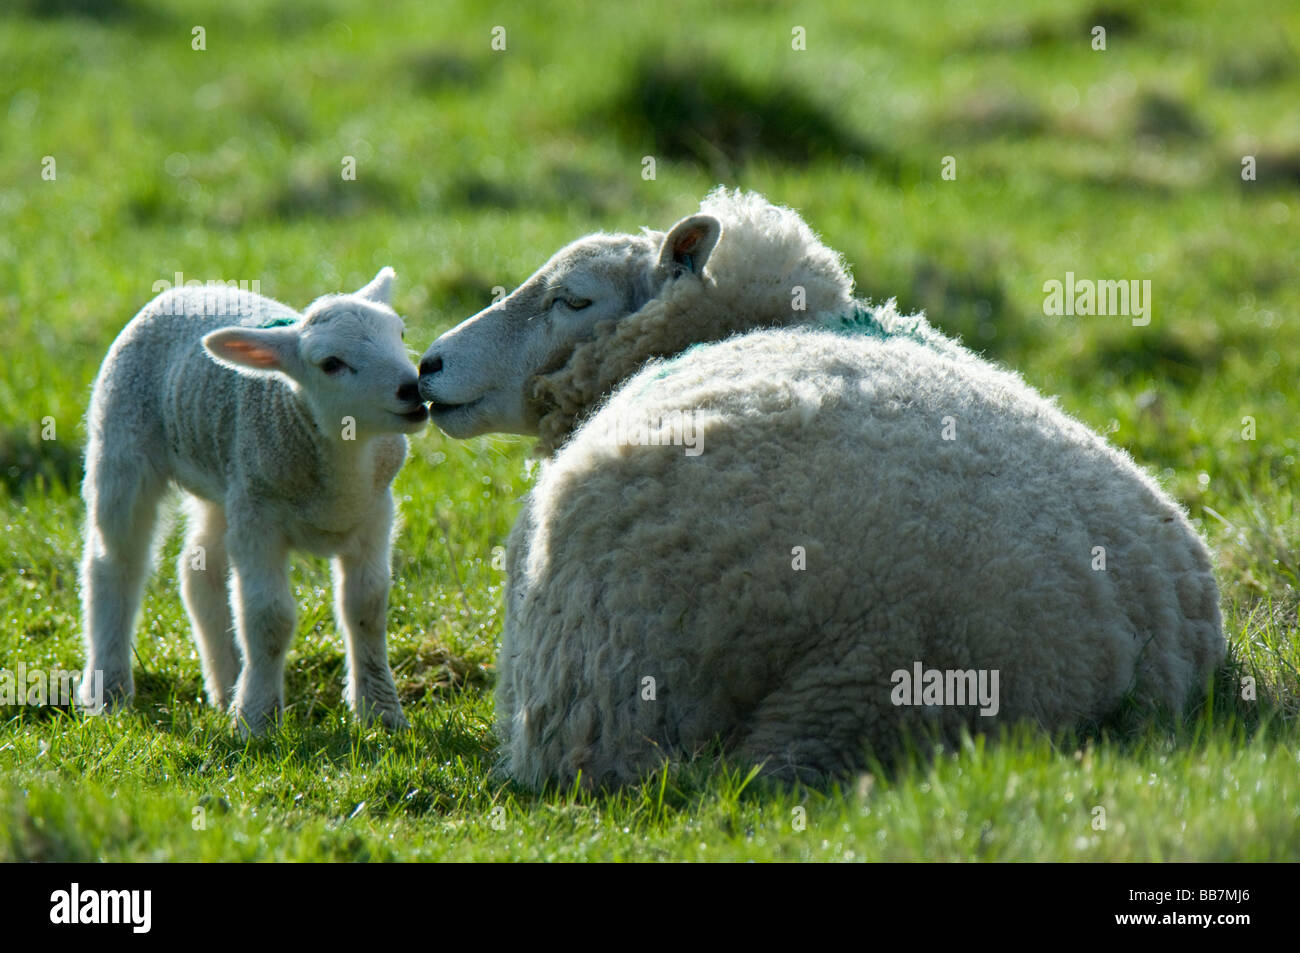 Mother sheep with young lamb in a grass field, Scotland. Stock Photo